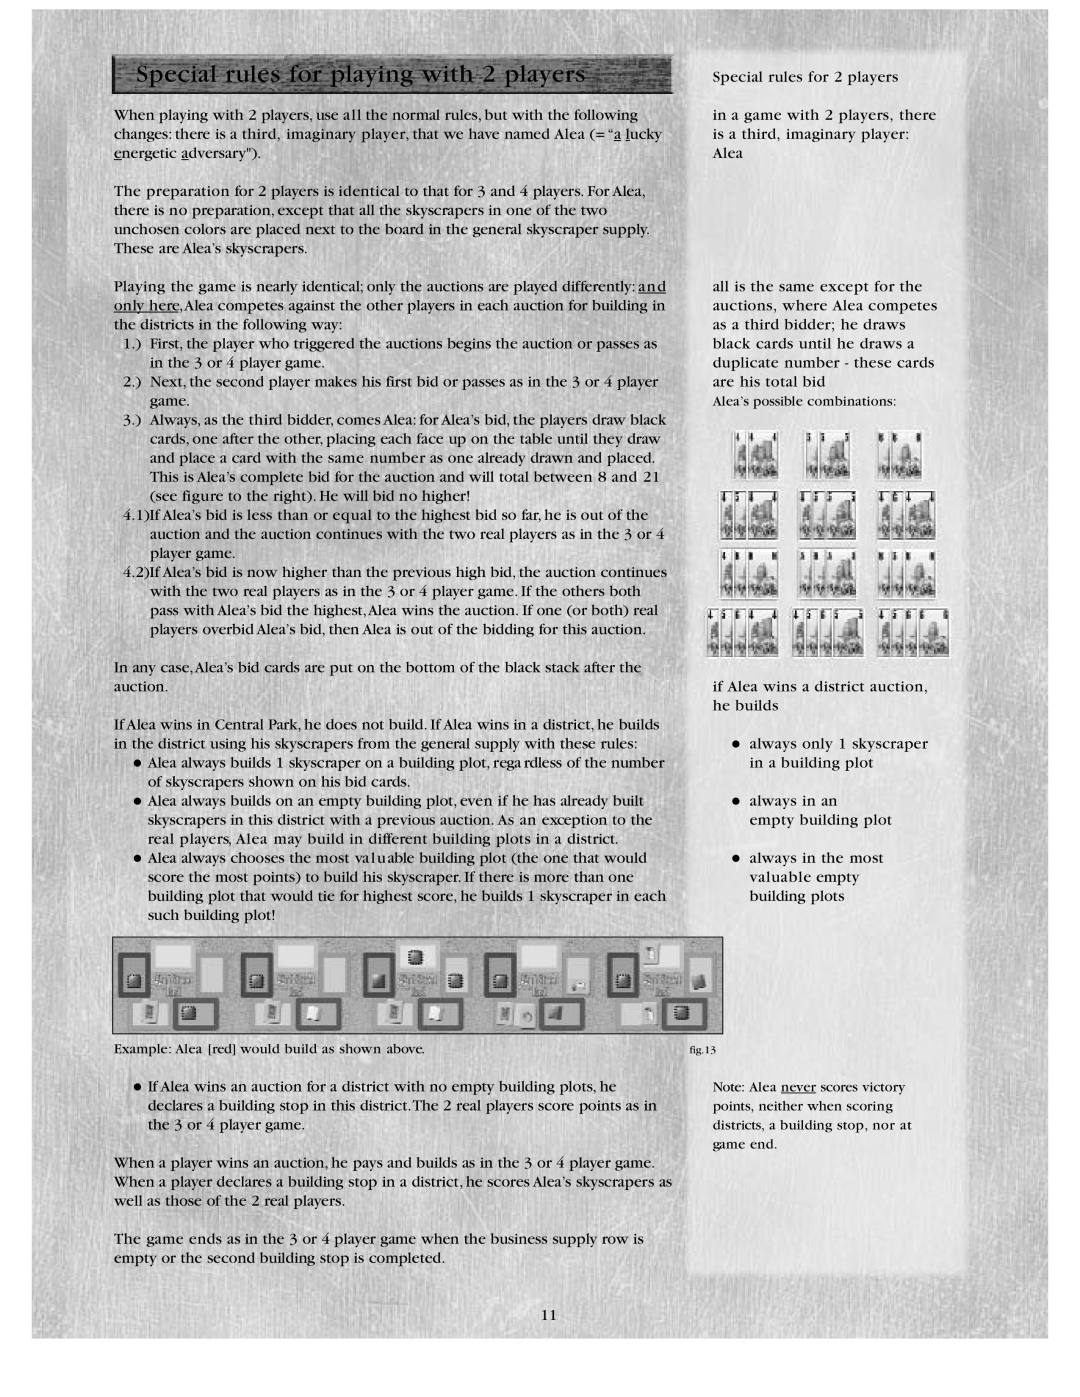 Rio Grande Games 5th Avenue manual Special rules for playing with 2 players 